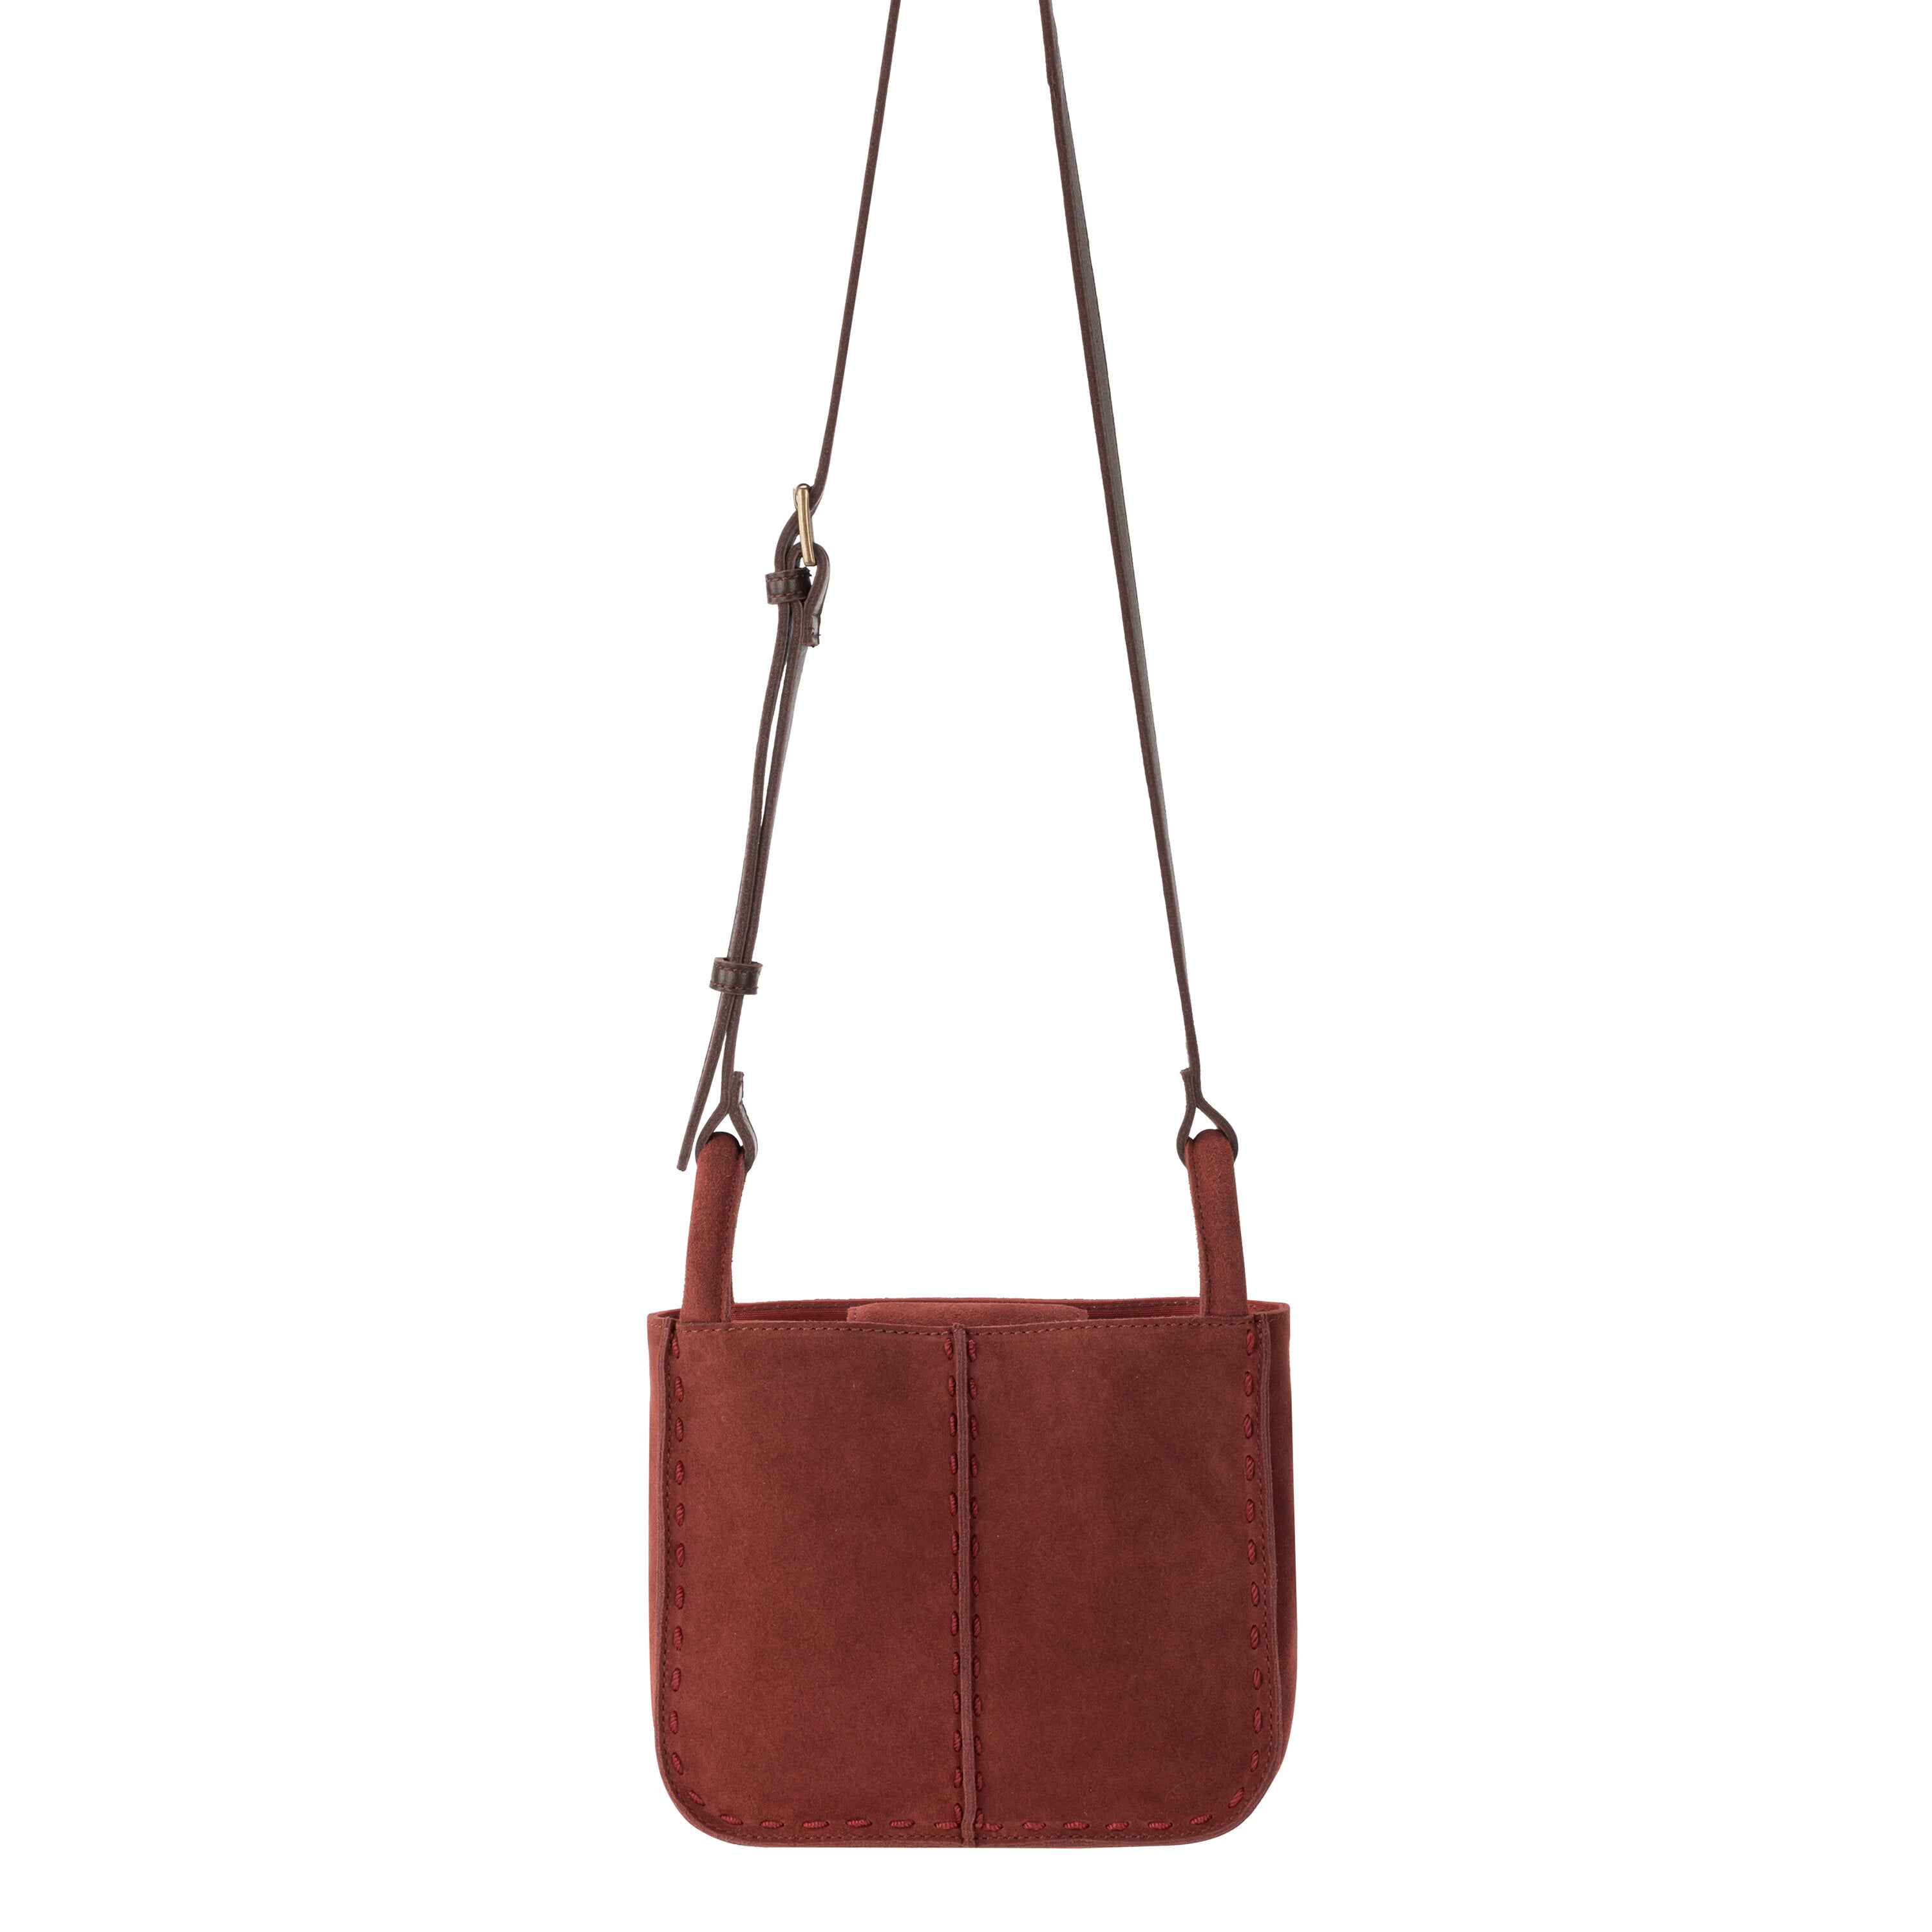 Crossbody Bags - 11 Bags for Summer, Shopping Guide